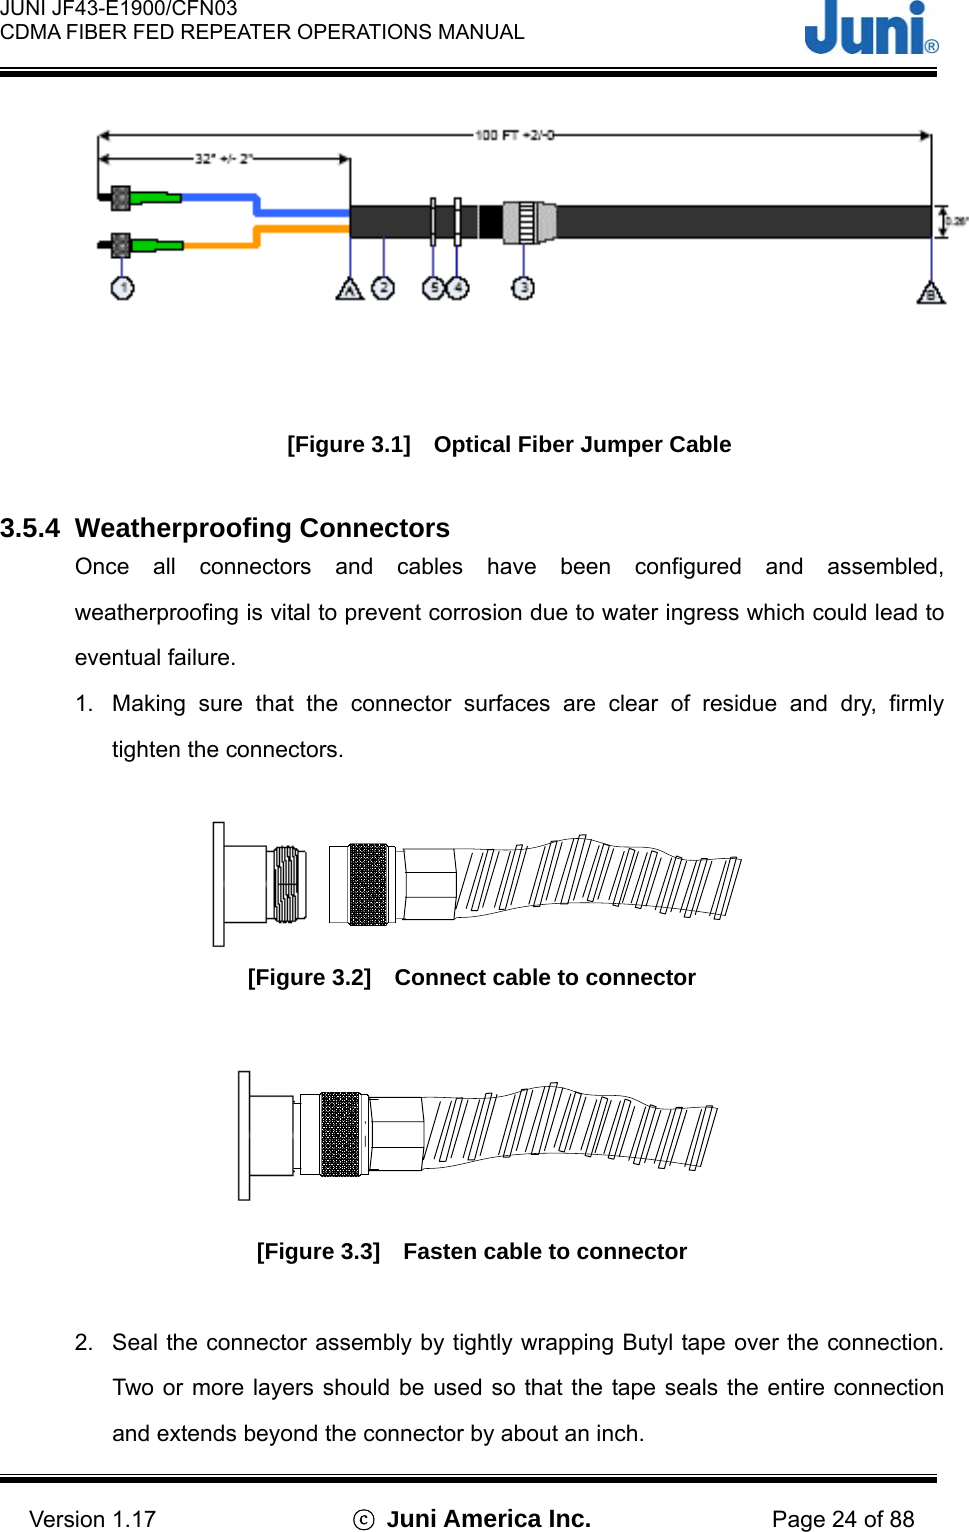  JUNI JF43-E1900/CFN03 CDMA FIBER FED REPEATER OPERATIONS MANUAL                                    Version 1.17  ⓒ Juni America Inc. Page 24 of 88  [Figure 3.1]    Optical Fiber Jumper Cable  3.5.4 Weatherproofing Connectors Once all connectors and cables have been configured and assembled, weatherproofing is vital to prevent corrosion due to water ingress which could lead to eventual failure. 1.  Making sure that the connector surfaces are clear of residue and dry, firmly tighten the connectors.   [Figure 3.2]    Connect cable to connector   [Figure 3.3]    Fasten cable to connector  2.  Seal the connector assembly by tightly wrapping Butyl tape over the connection. Two or more layers should be used so that the tape seals the entire connection and extends beyond the connector by about an inch. 